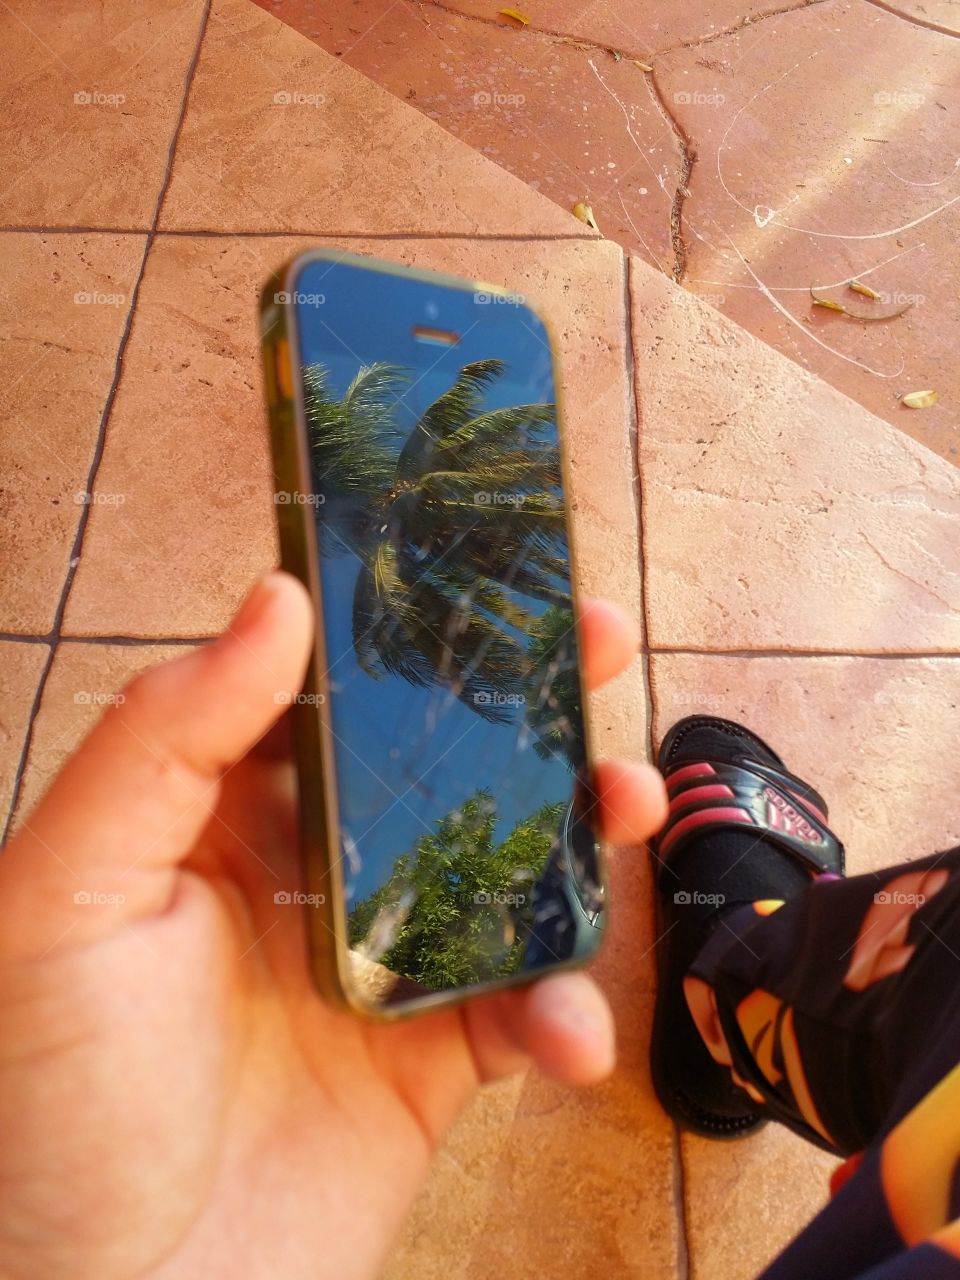 iPhone reflection